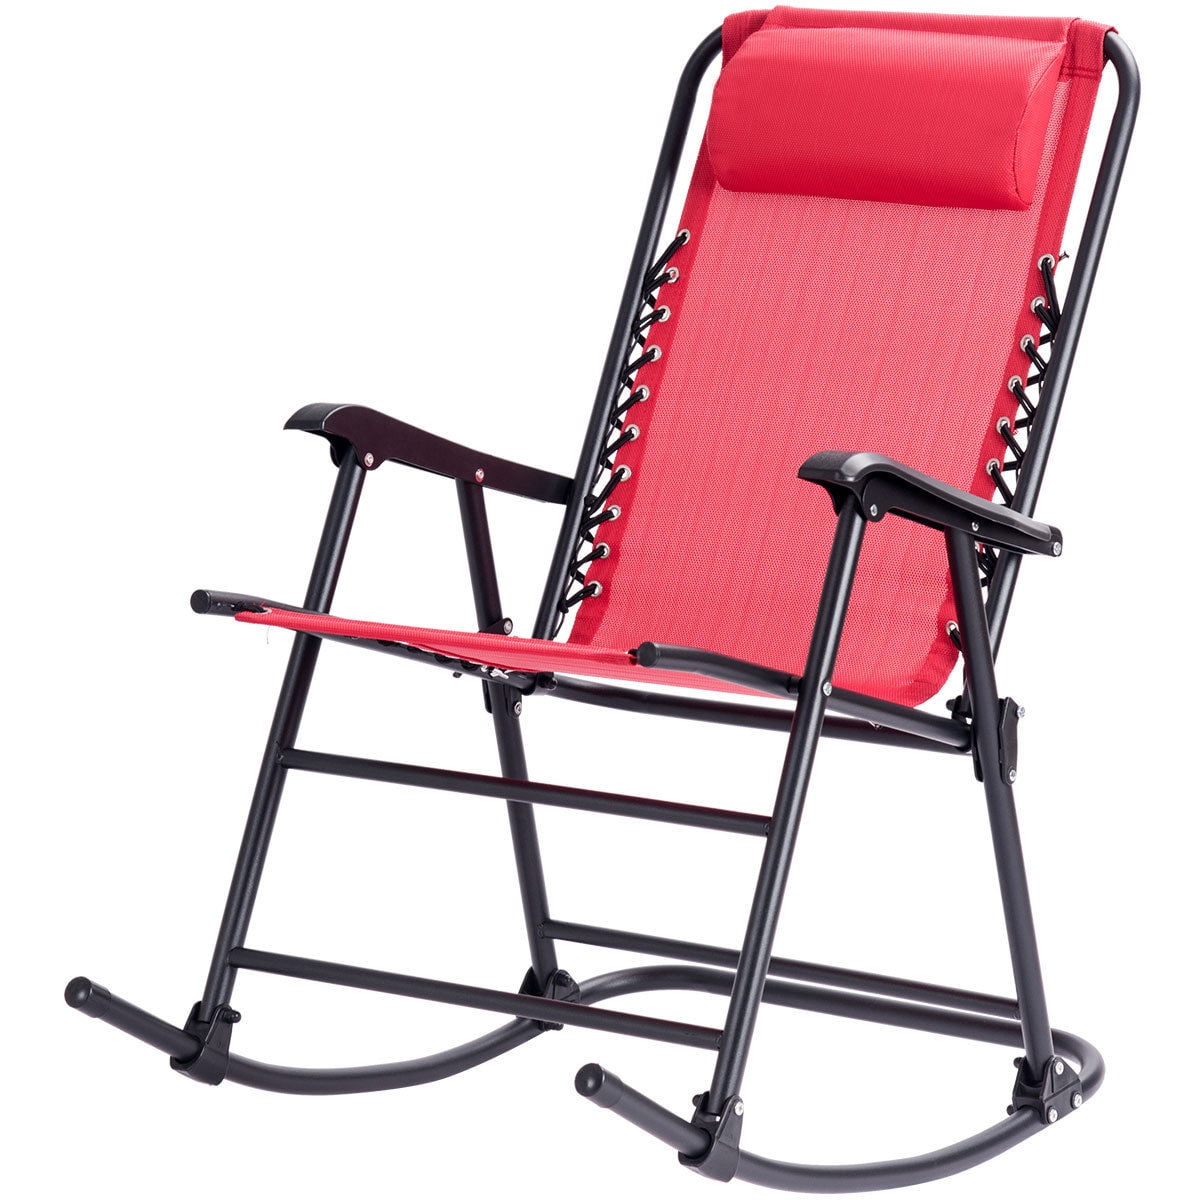 Rocking Chair Large Comfortable Sturdy Steel Folding Rocker Camping Patio Porch 